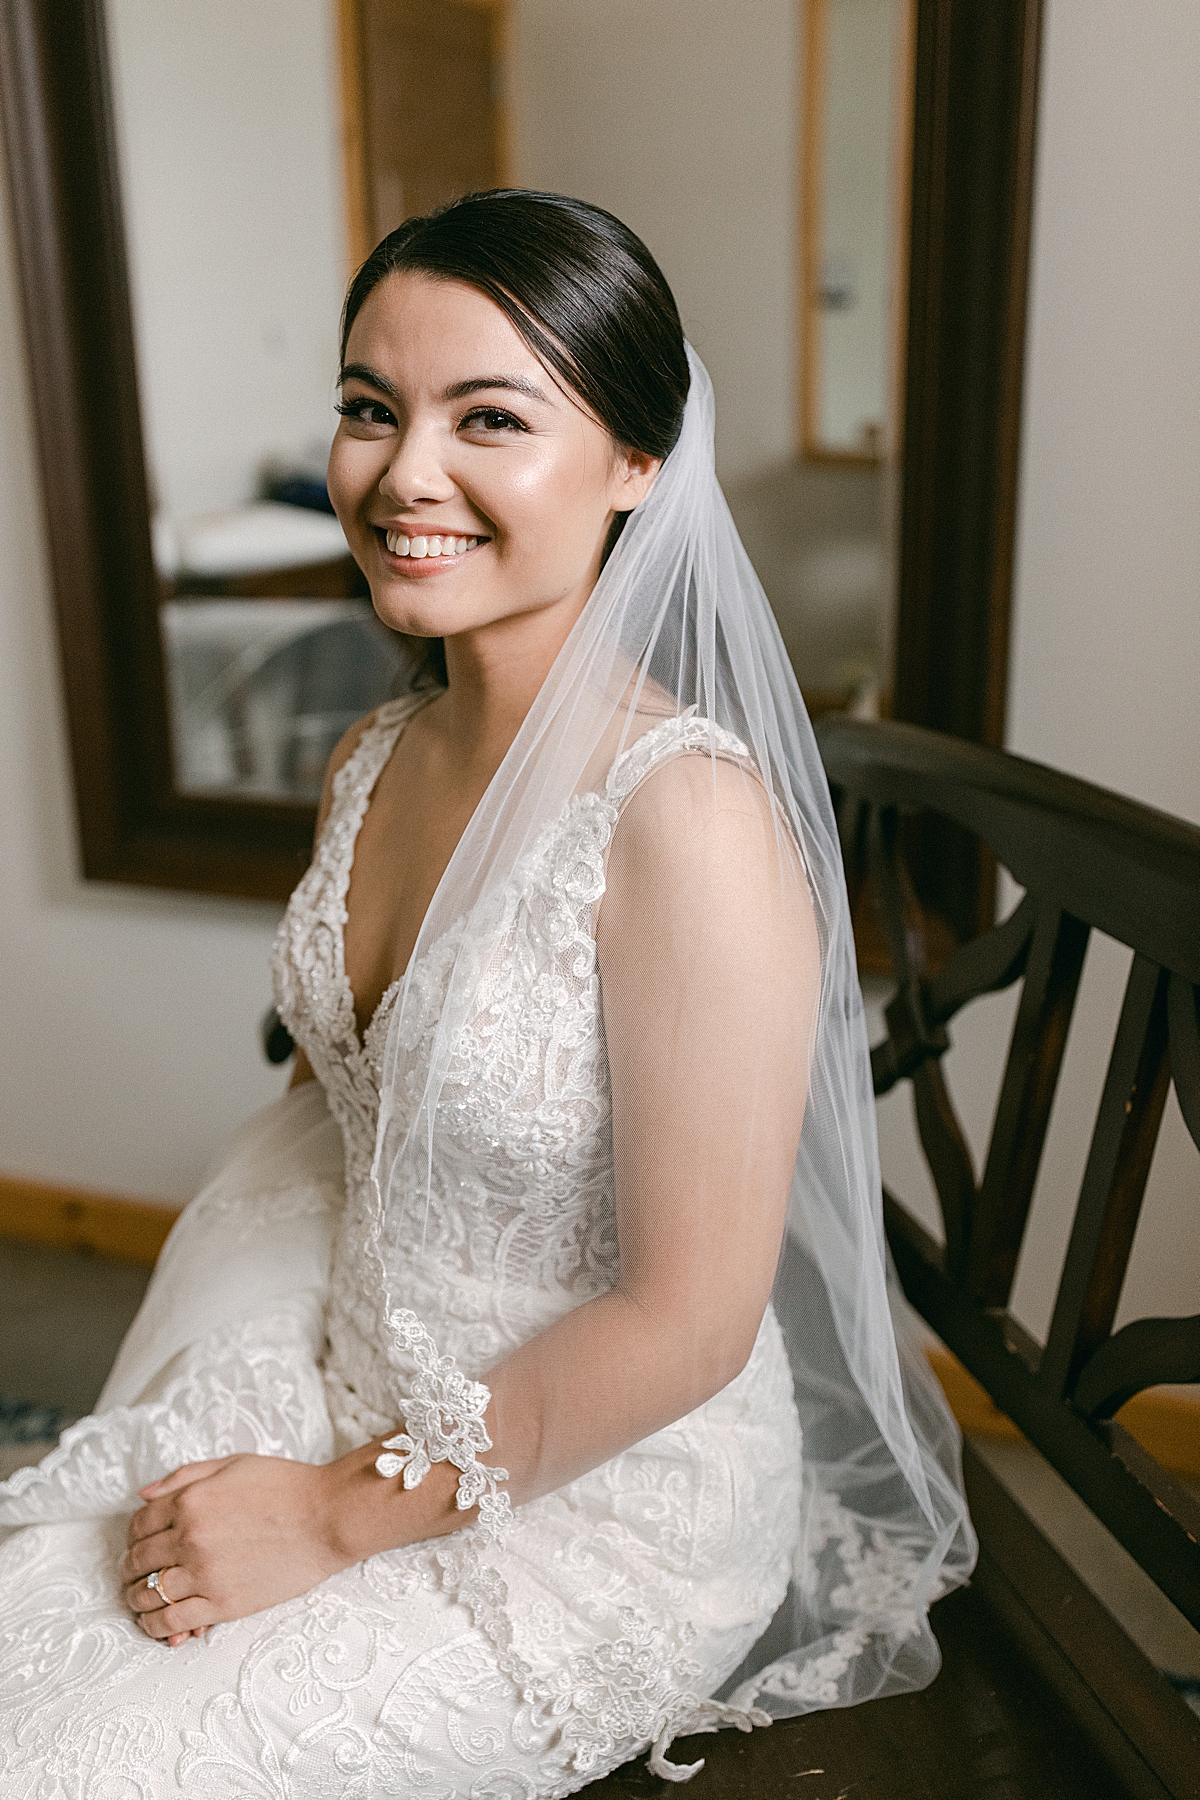 bride smiling at camera while getting ready